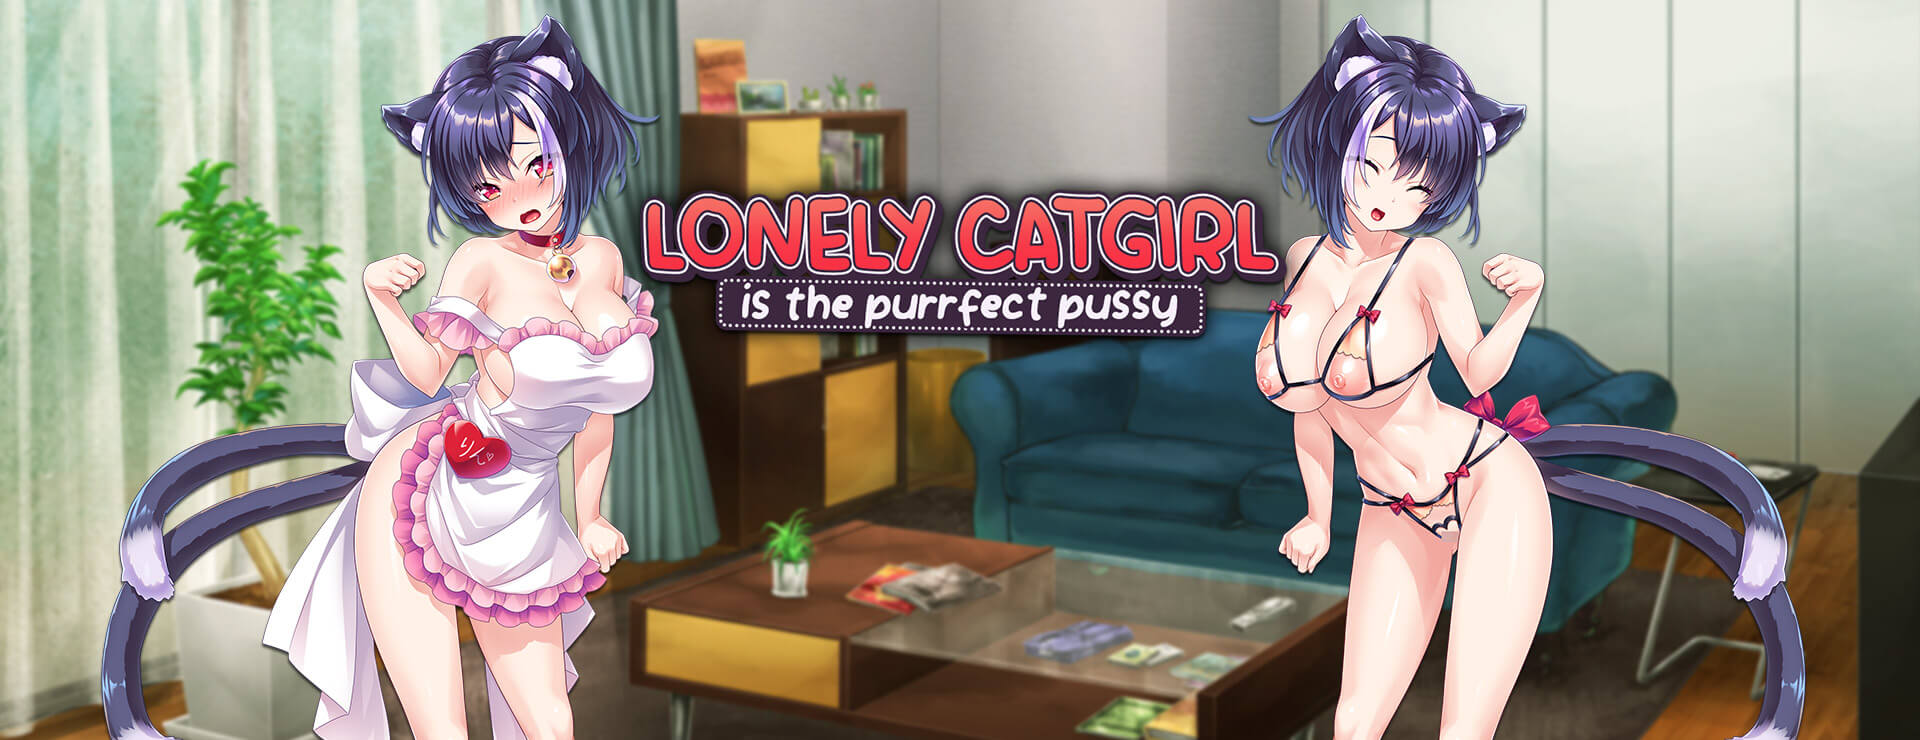 Lonely Catgirl is the Purrfect Pussy - ビジュアルノベル ゲーム